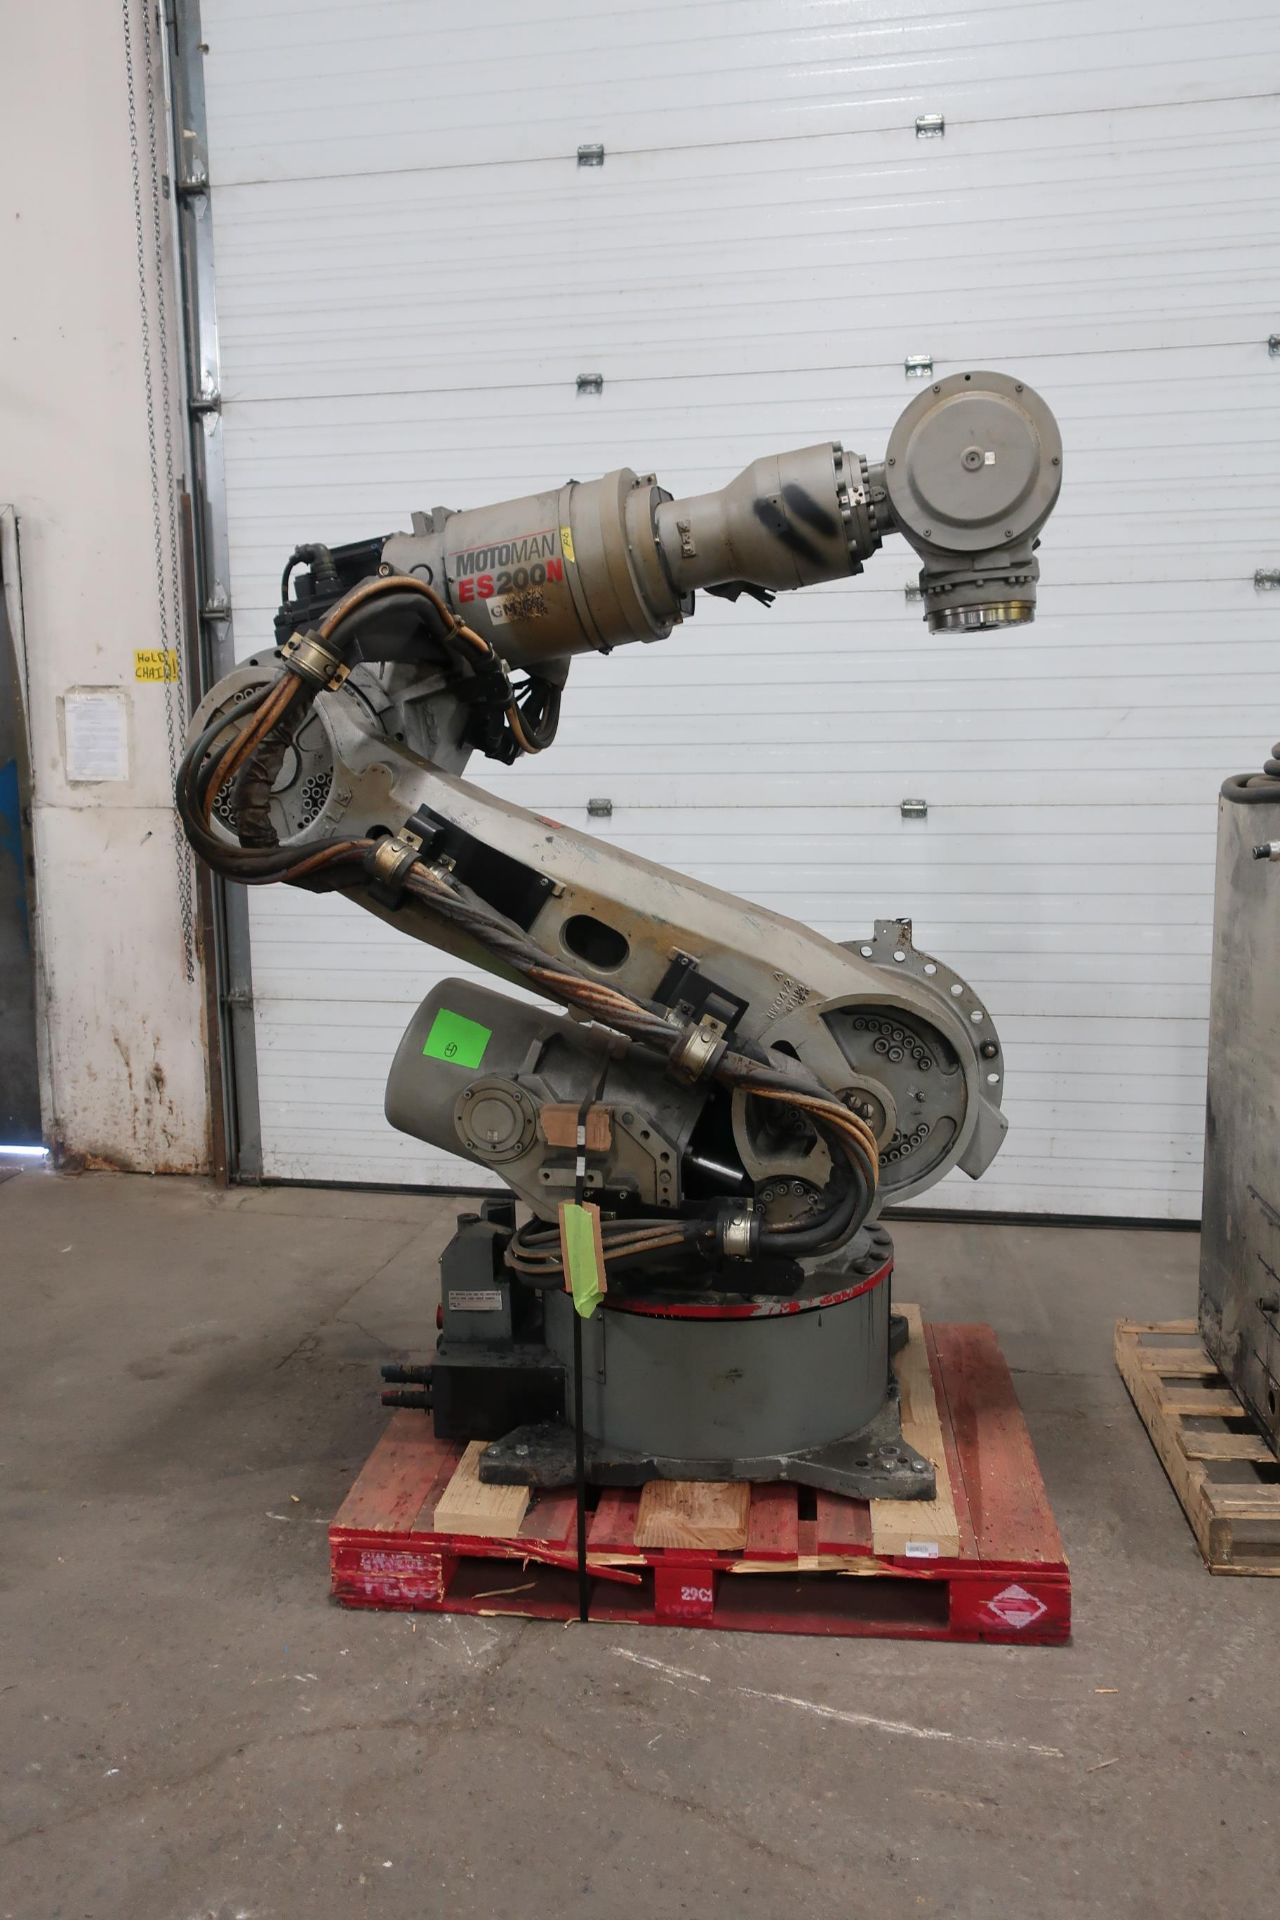 2008 Motoman ES200N Robot 200kg Capacity with Controller COMPLETE with Teach Pendant, Cables, LOW - Image 3 of 3